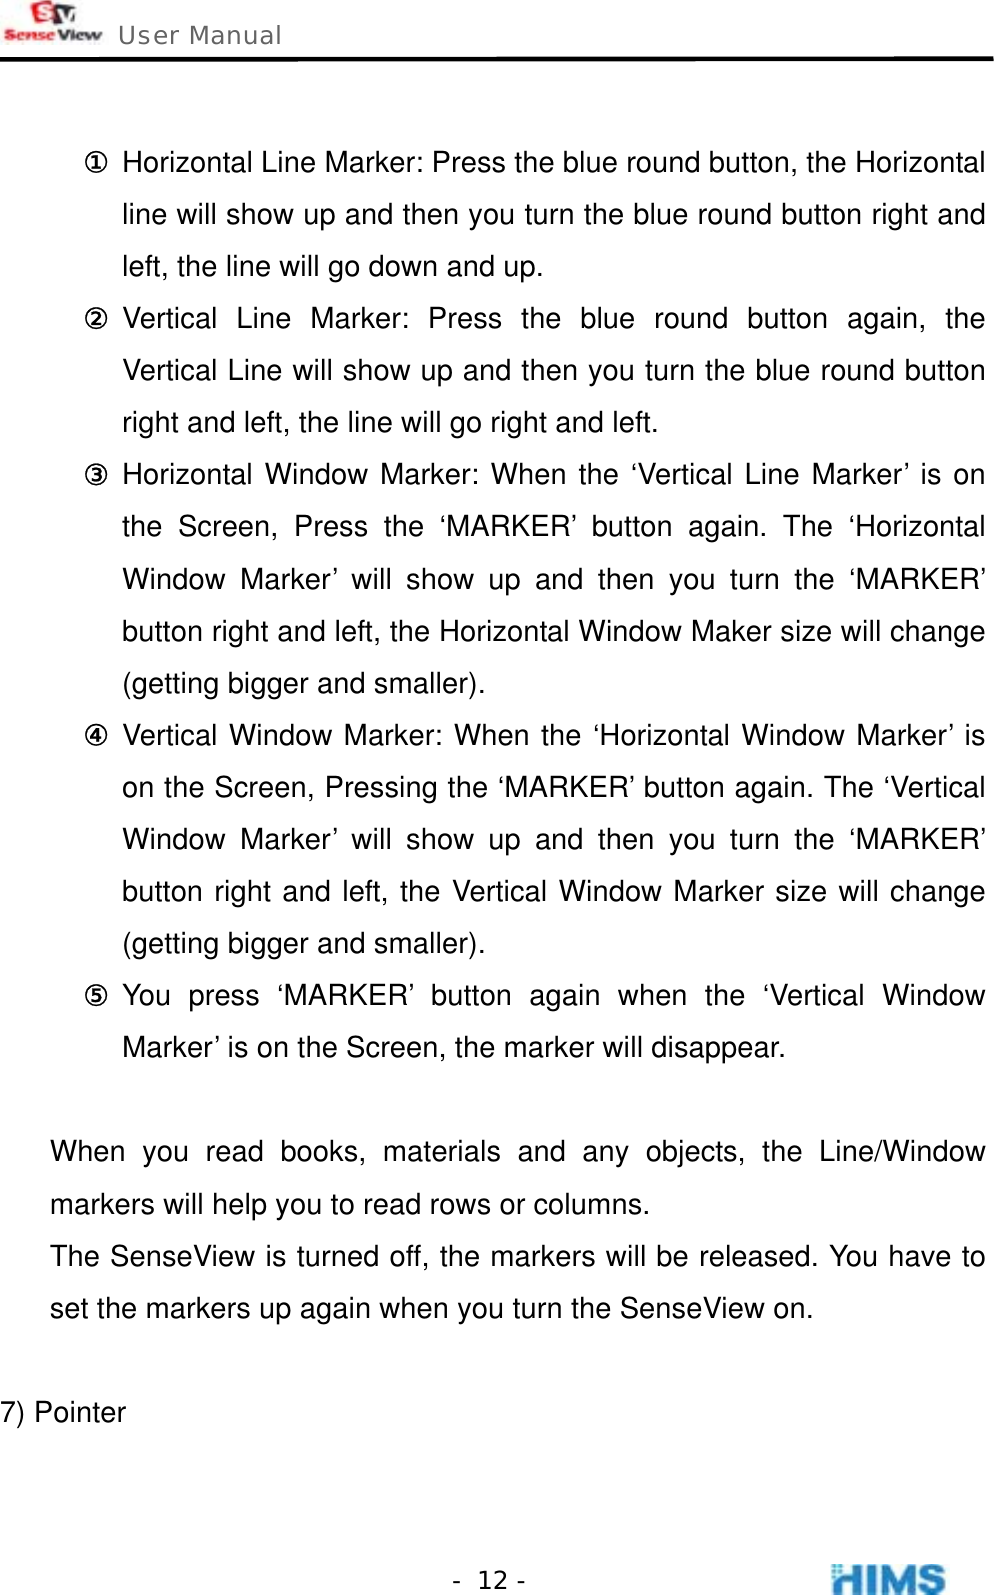  User Manual    - 12 - ① Horizontal Line Marker: Press the blue round button, the Horizontal line will show up and then you turn the blue round button right and left, the line will go down and up. ② Vertical Line Marker: Press the blue round button again, the Vertical Line will show up and then you turn the blue round button right and left, the line will go right and left. ③ Horizontal Window Marker: When the ‘Vertical Line Marker’ is on the Screen, Press the ‘MARKER’ button again. The ‘Horizontal Window Marker’ will show up and then you turn the ‘MARKER’ button right and left, the Horizontal Window Maker size will change (getting bigger and smaller). ④ Vertical Window Marker: When the ‘Horizontal Window Marker’ is on the Screen, Pressing the ‘MARKER’ button again. The ‘Vertical Window Marker’ will show up and then you turn the ‘MARKER’ button right and left, the Vertical Window Marker size will change (getting bigger and smaller). ⑤ You press ‘MARKER’ button again when the ‘Vertical Window Marker’ is on the Screen, the marker will disappear.  When you read books, materials and any objects, the Line/Window markers will help you to read rows or columns.   The SenseView is turned off, the markers will be released. You have to set the markers up again when you turn the SenseView on.  7) Pointer 